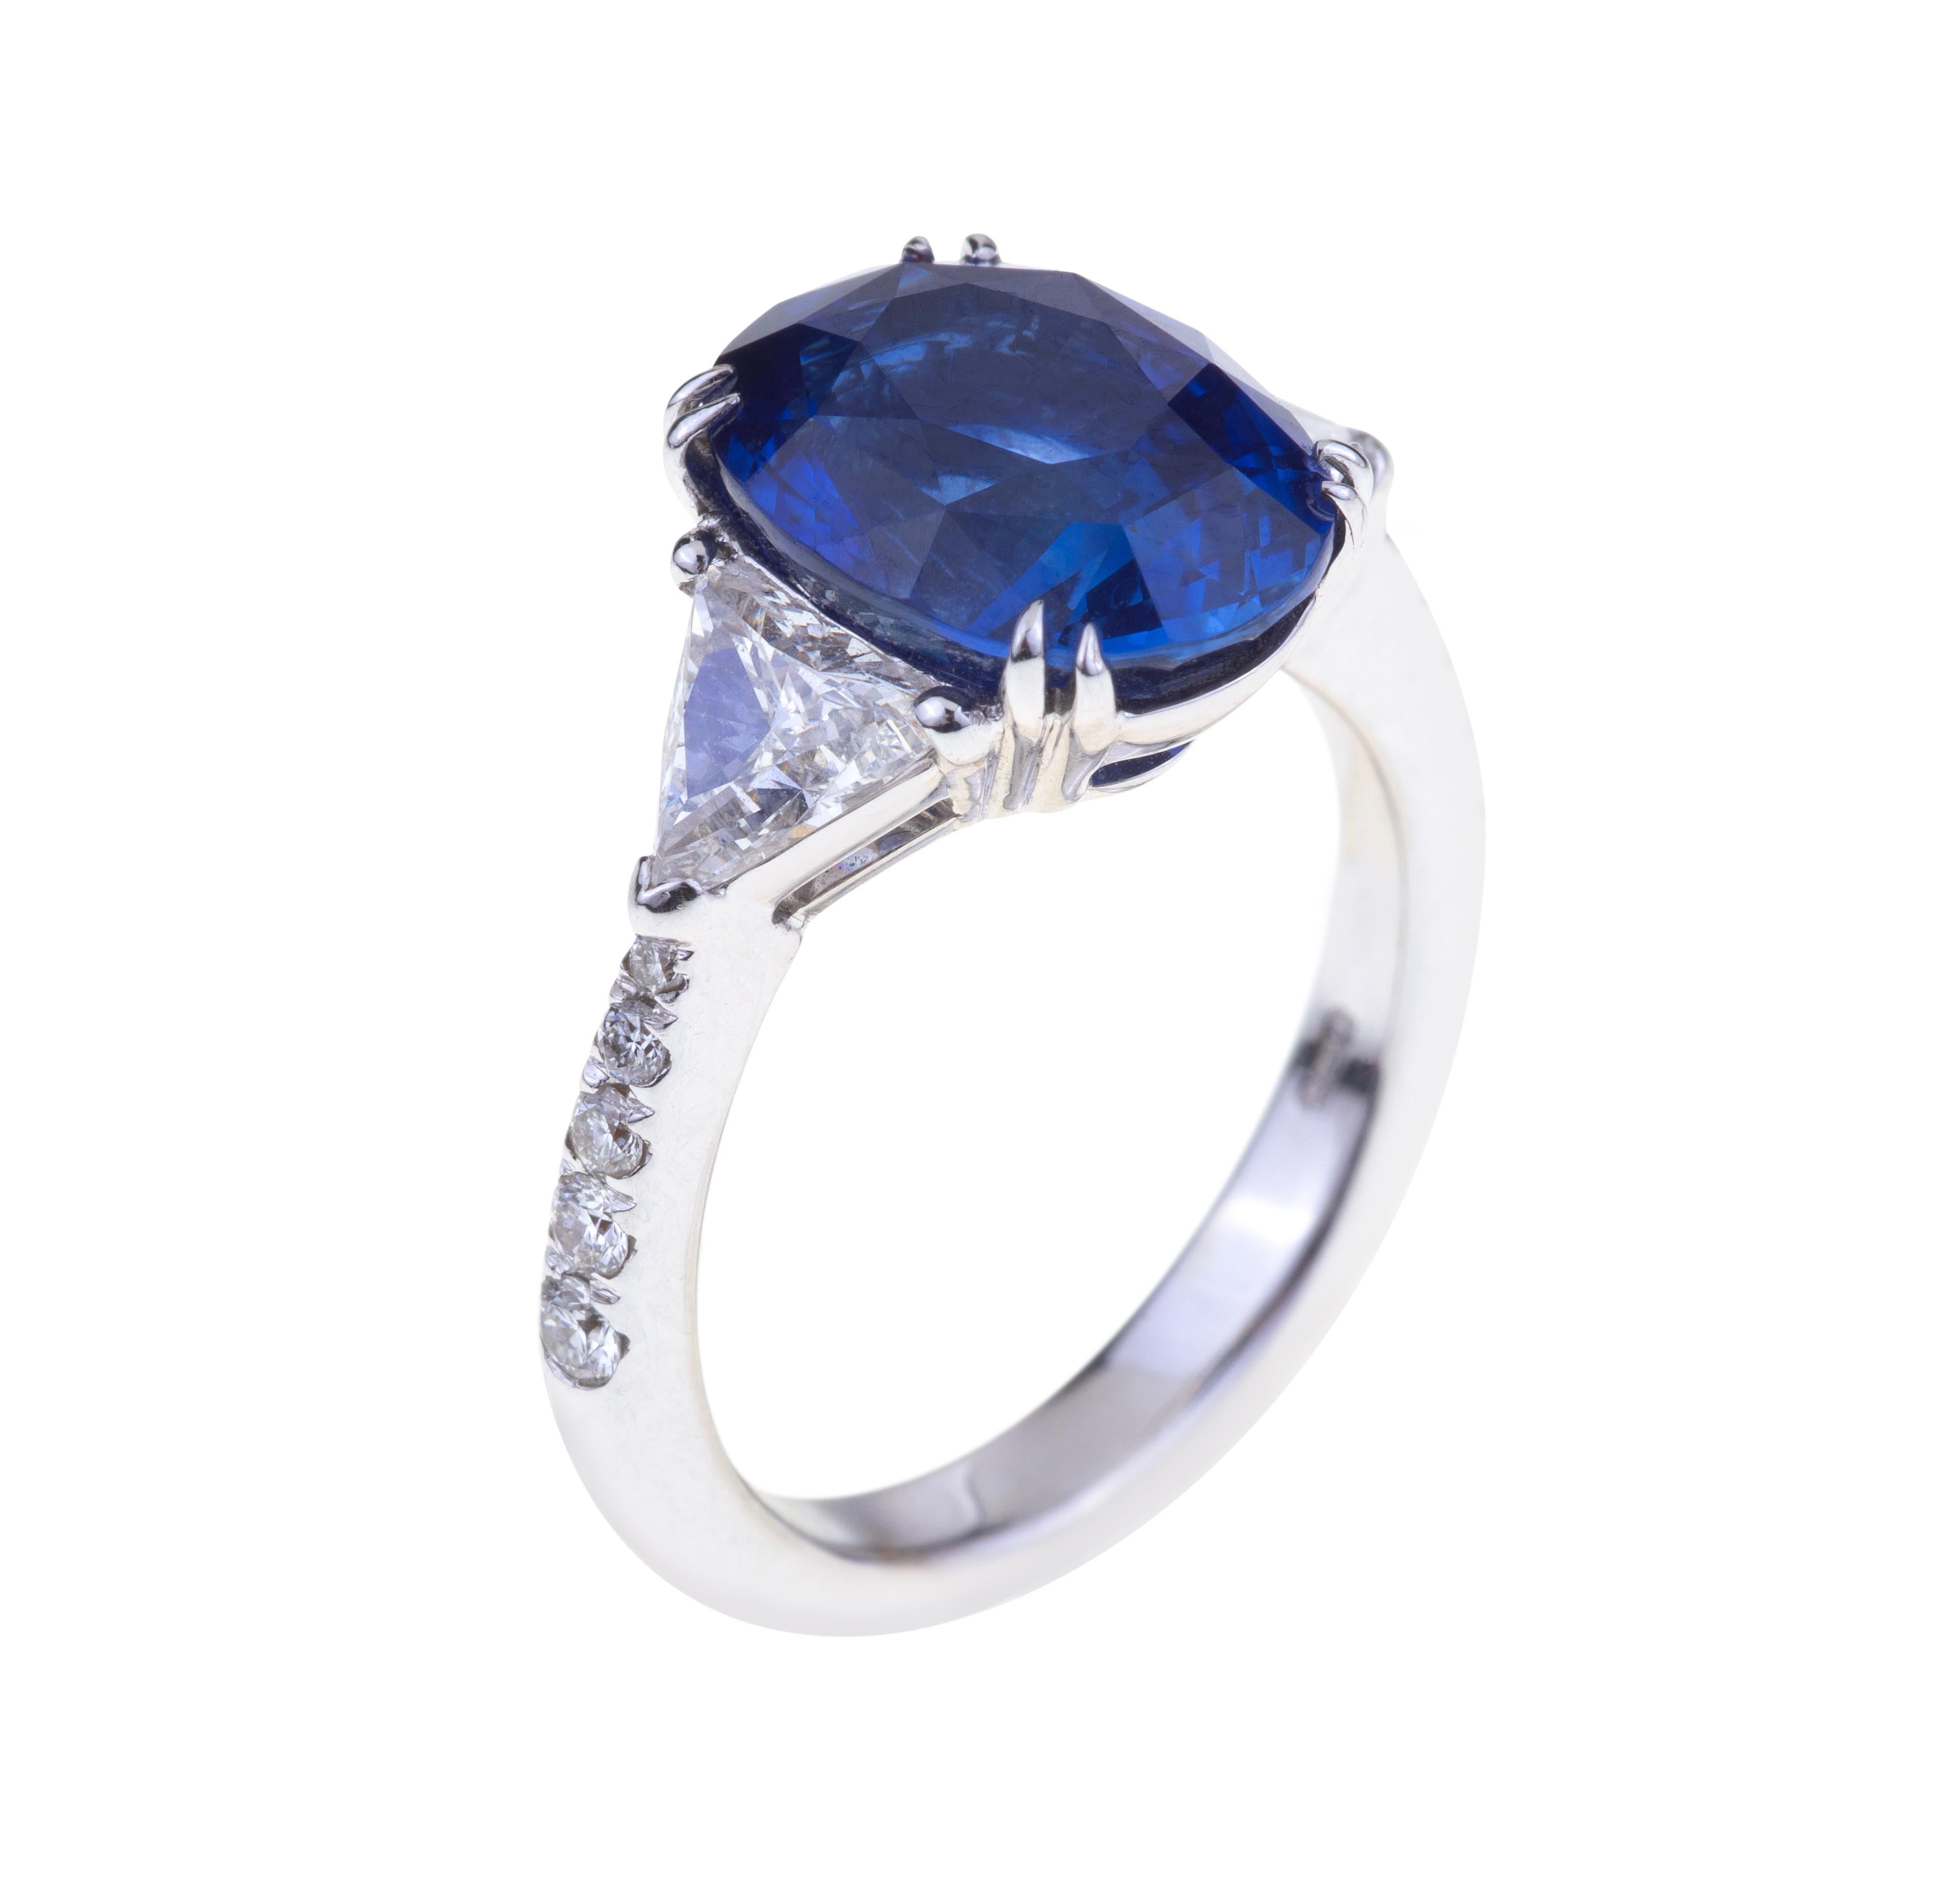 Stunning Oval Blue Sapphires Ring ct. 5.90 Certificate with Diamonds.
Classic Design for this Ring with a Stunning Blue Sapphire (ct. 5.90 ) with Diamonds on the side (ct. 1.18 Round G-SI). The weight of 18kt Gold is 6.10. Certificate